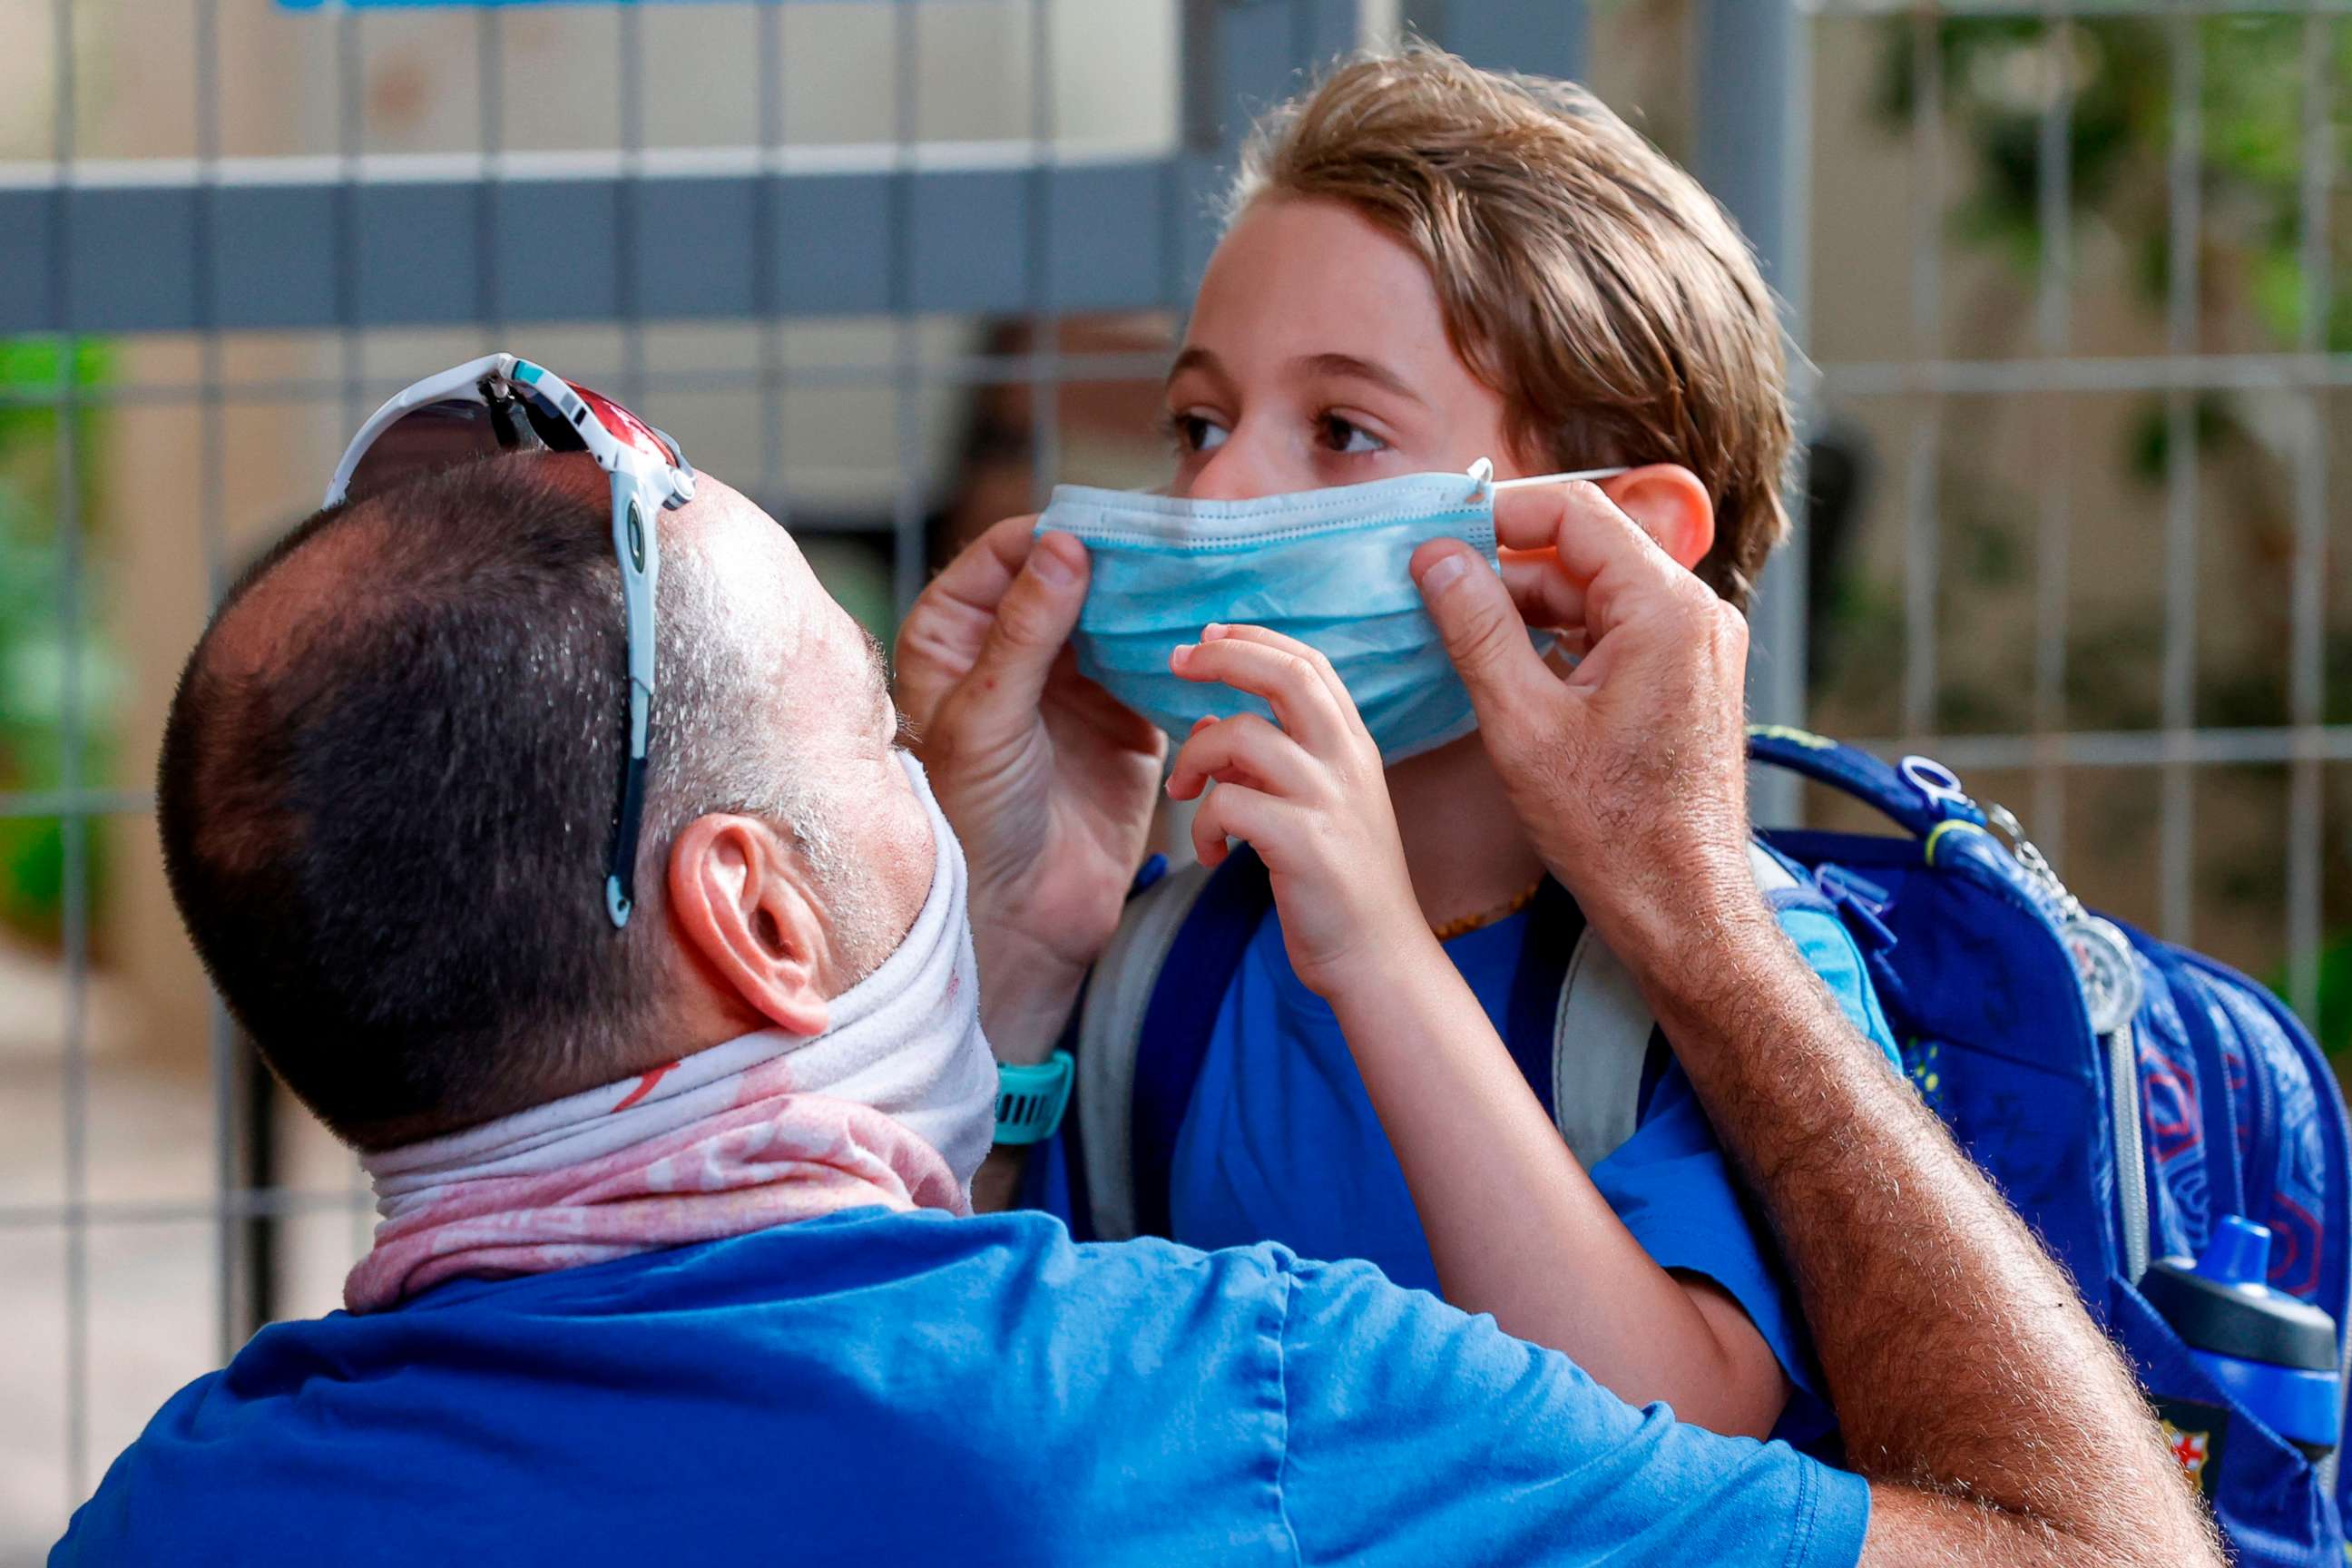 PHOTO: An father adjusts the face mask of his daughter on the first day of school, during the coronavirus pandemic, in the Israeli coastal city of Tel Aviv on Sept. 1, 2020.